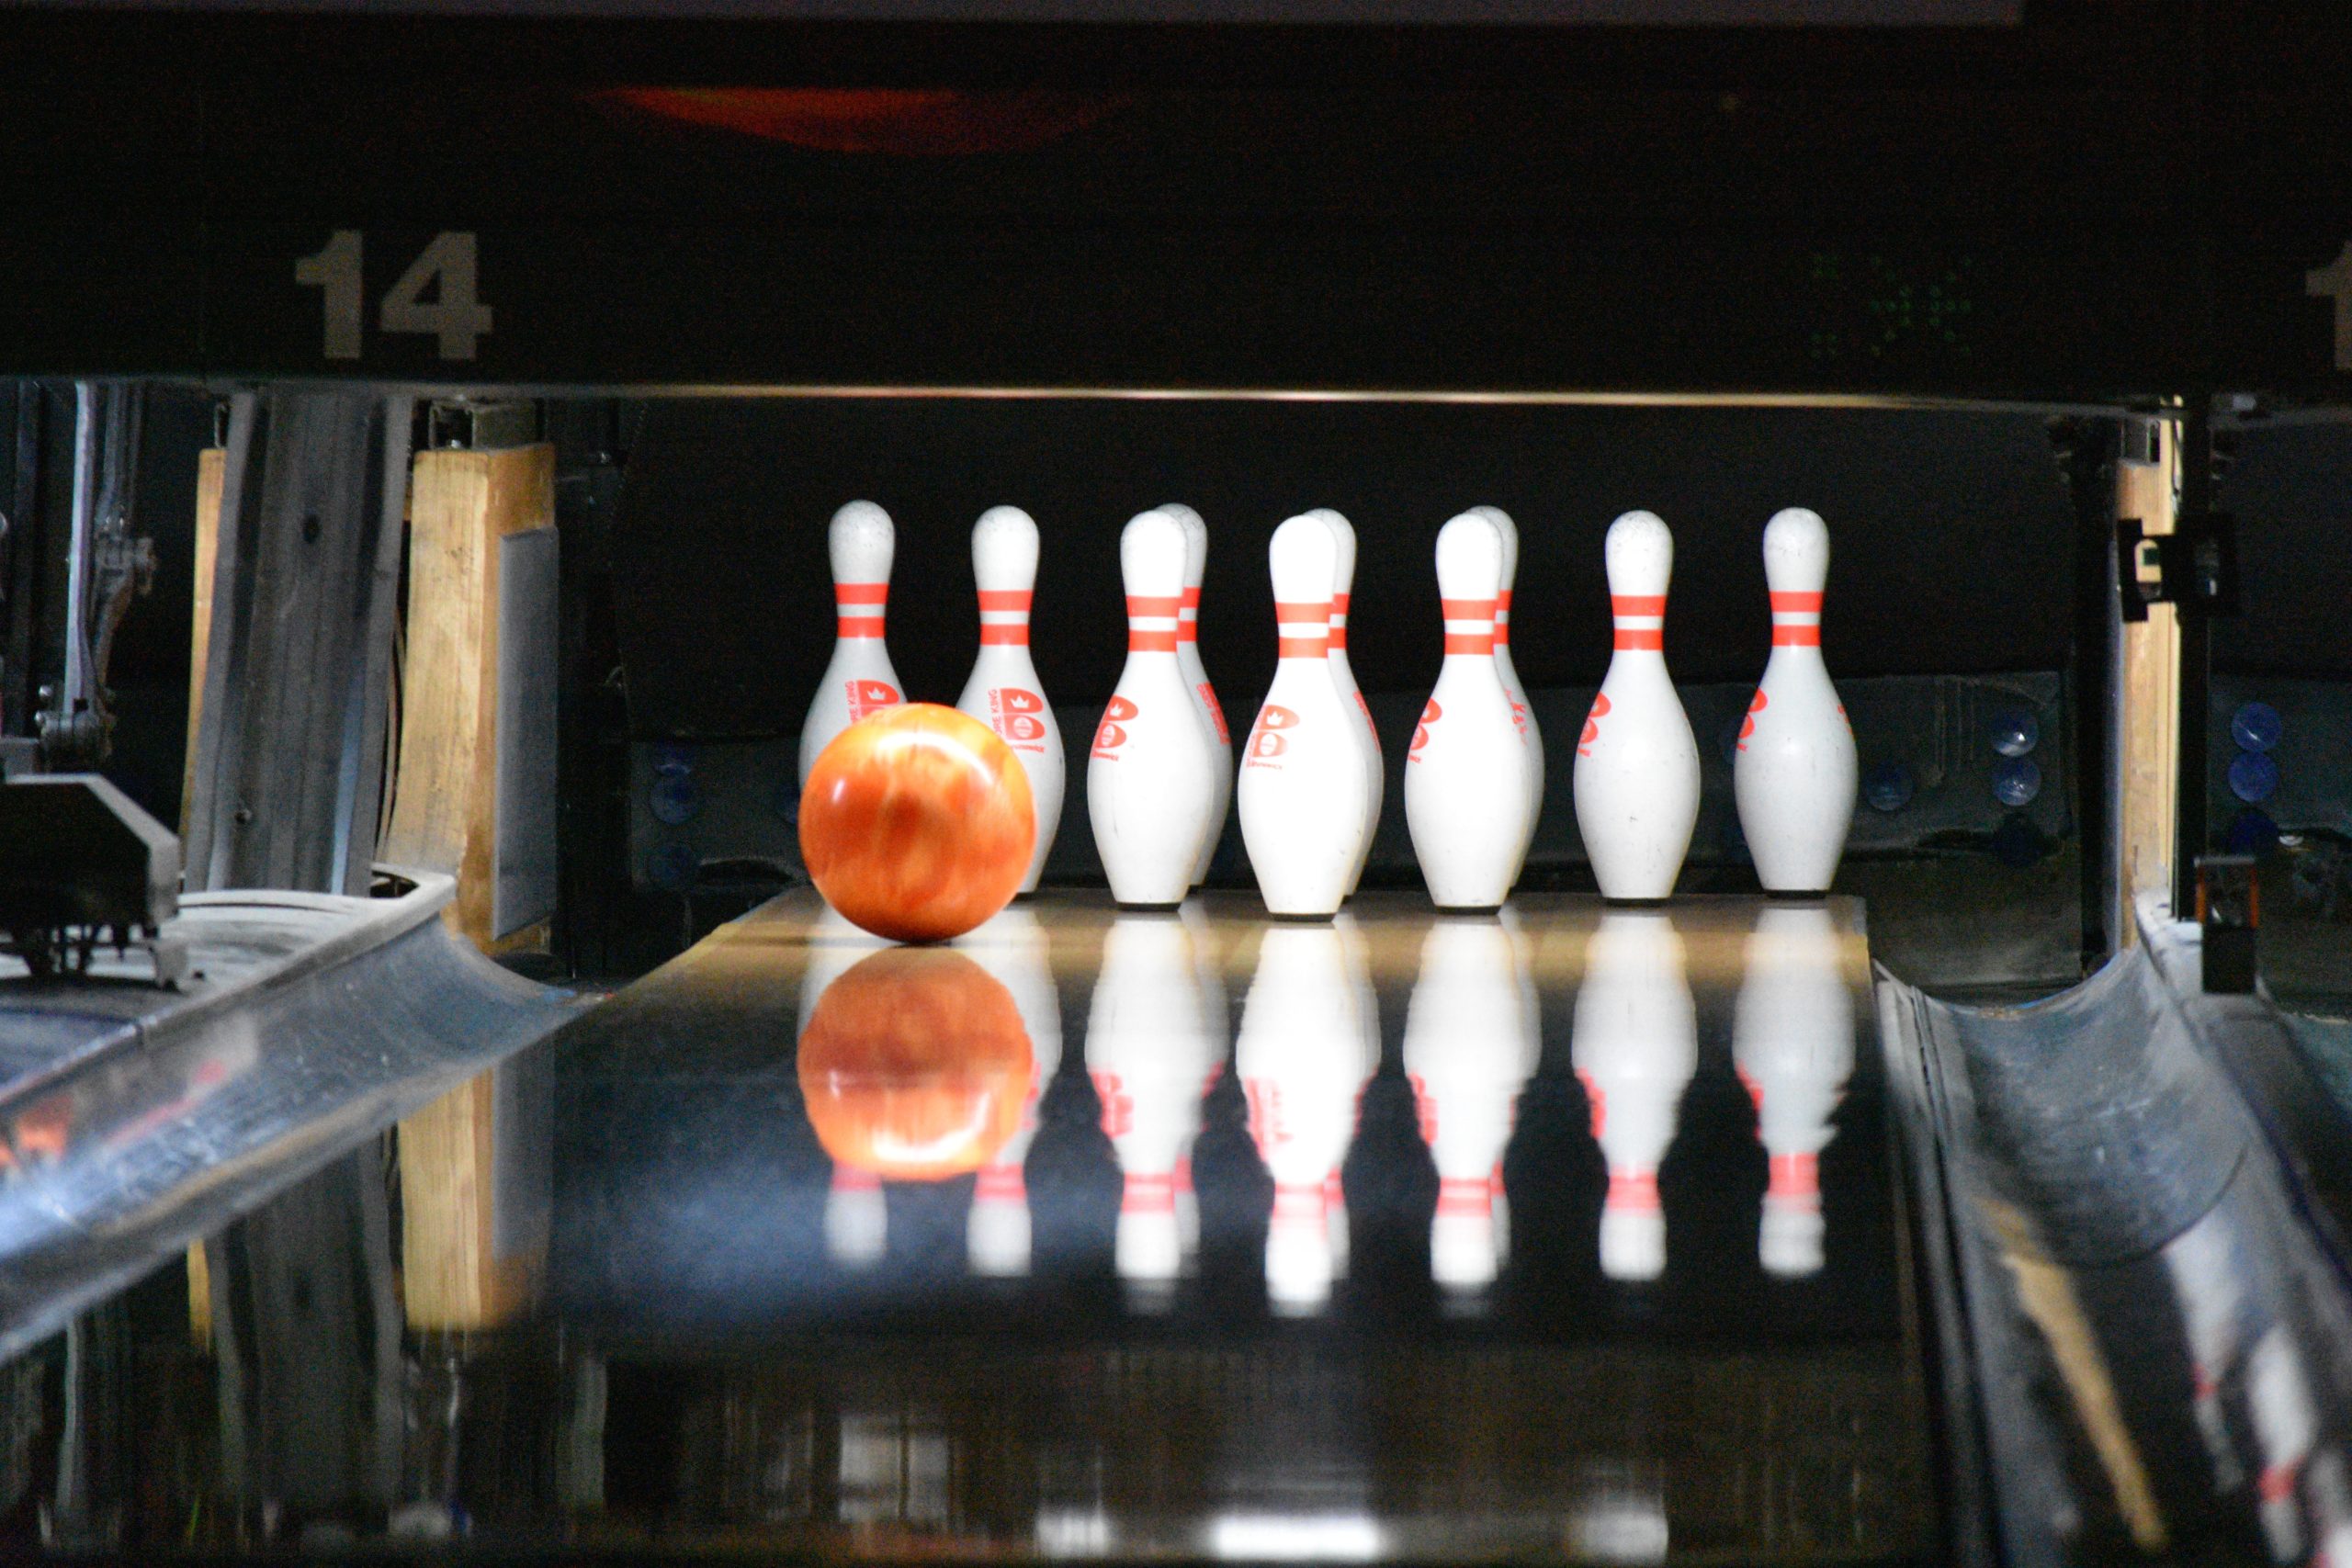 Bowling is one of the activities you can enjoy for nightlife in Big Bear.